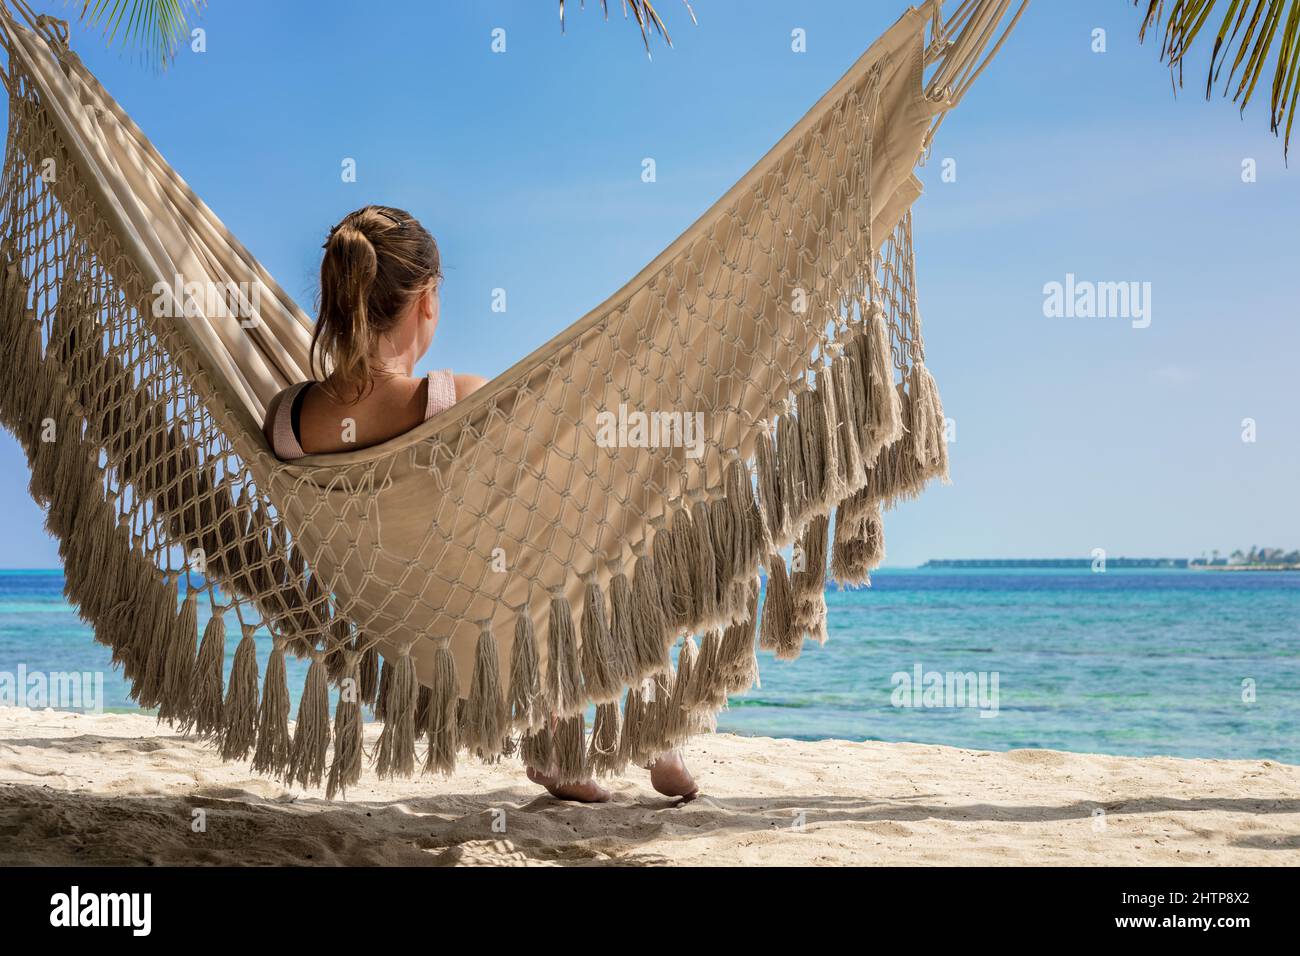 Beach vacation holidays with woman relaxing in hammock between coconut palm tree, white sand, blue sky and turquoise water. Scenic island resort in Ma Stock Photo